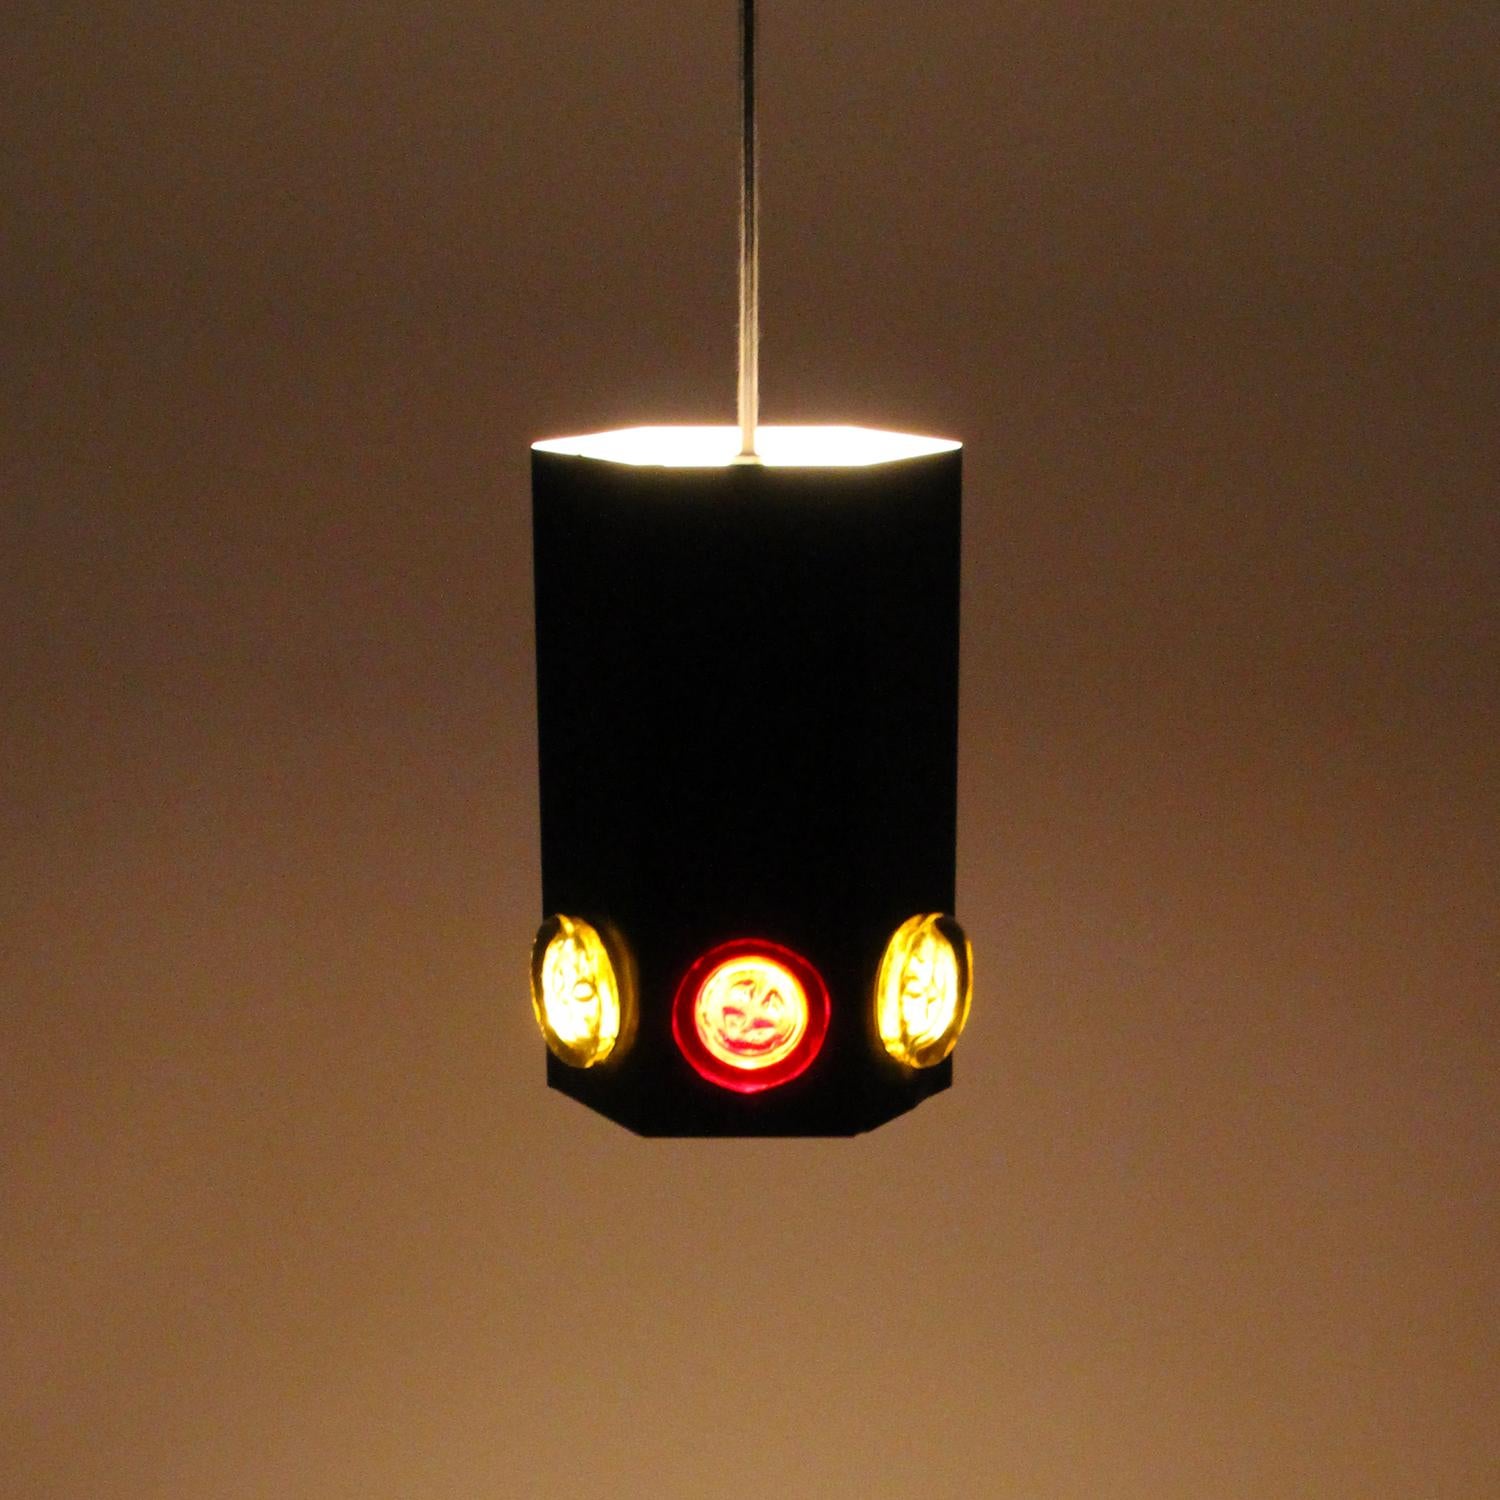 Mid-20th Century TYPE 6284, Black Pendant by Holm Sorensen & Co., 1960s Rare Metal and Glass Lamp